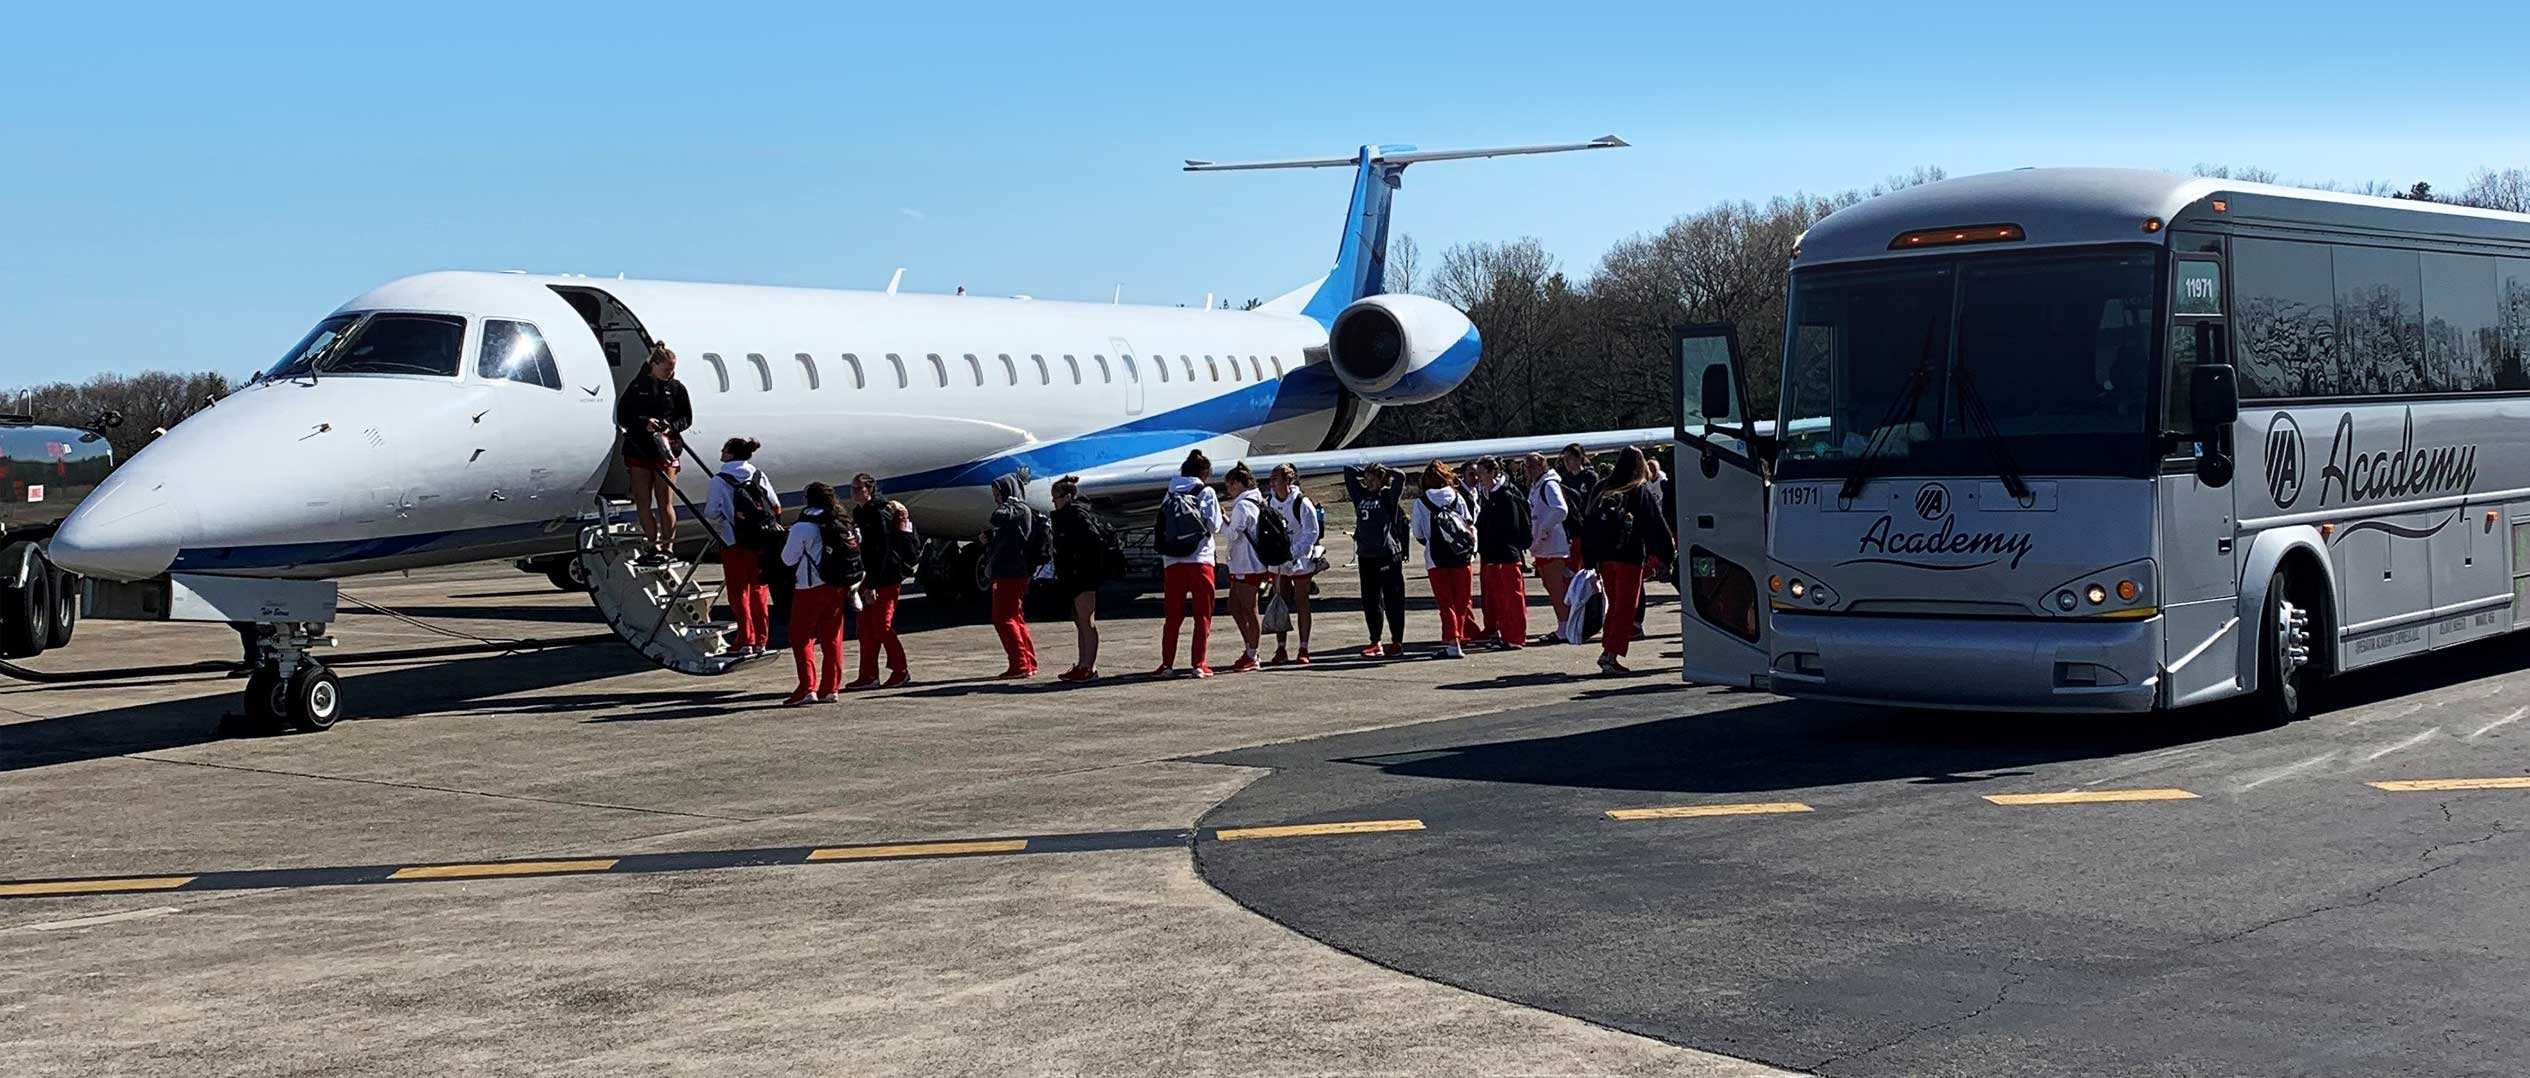 college basketball team boarding plane at westover airport